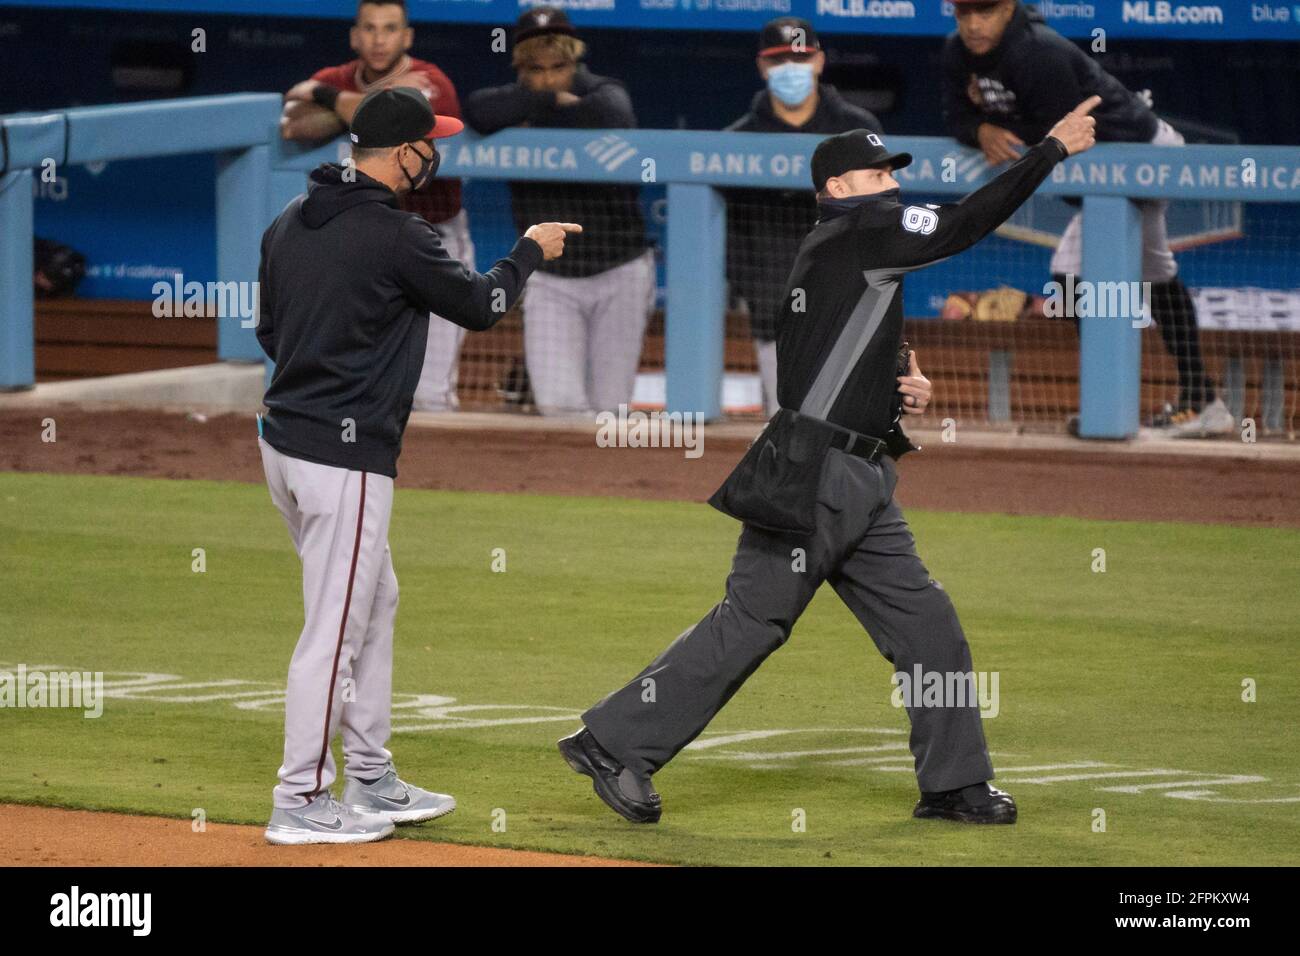 Arizona Diamondbacks manager Torey Lovullo (17) is thrown out by umpire Will Little (93) for arguing a call during a MLB game, Wednesday, May 19, 2021 Stock Photo